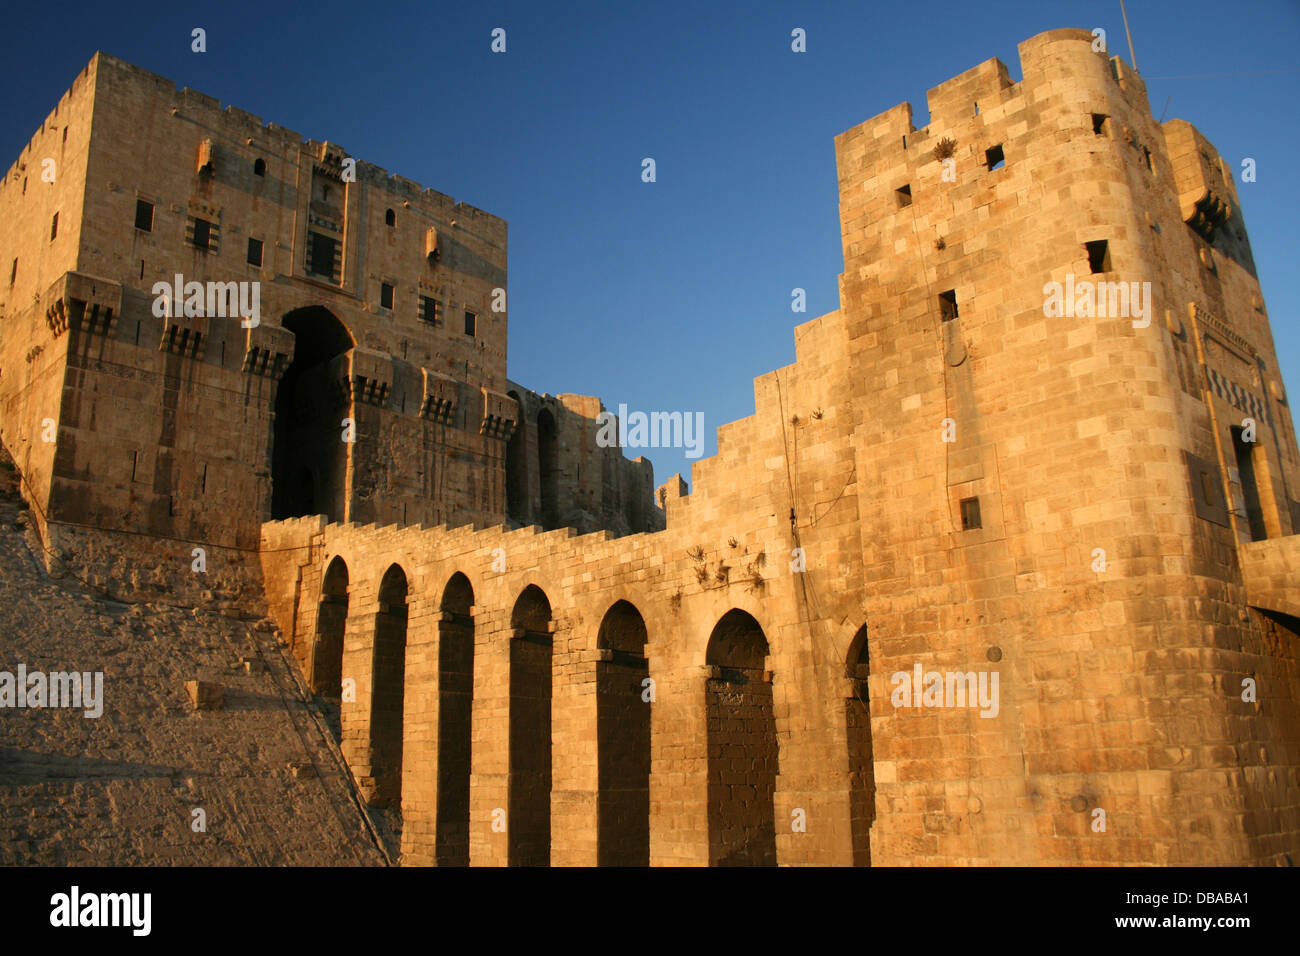 View of the Citadel of Aleppo, Syria Stock Photo